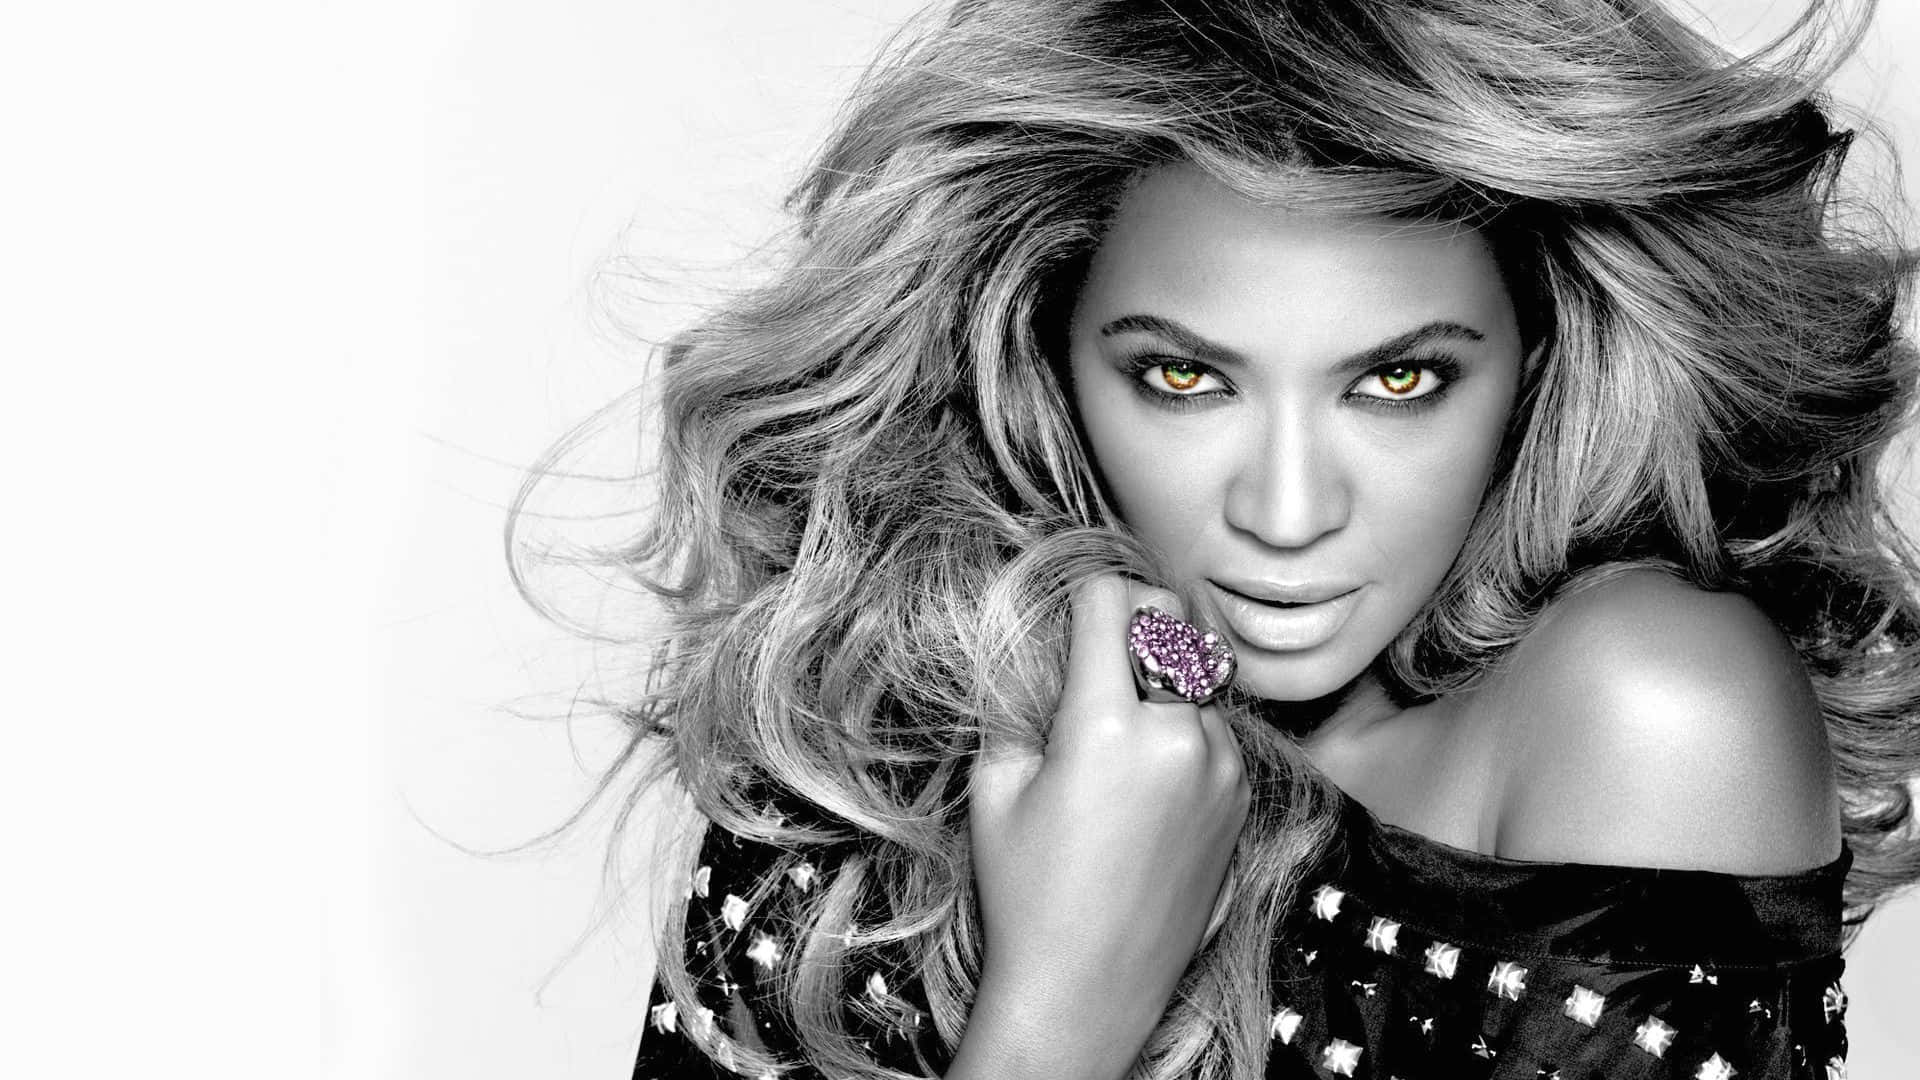 Queen Bey reigns on!